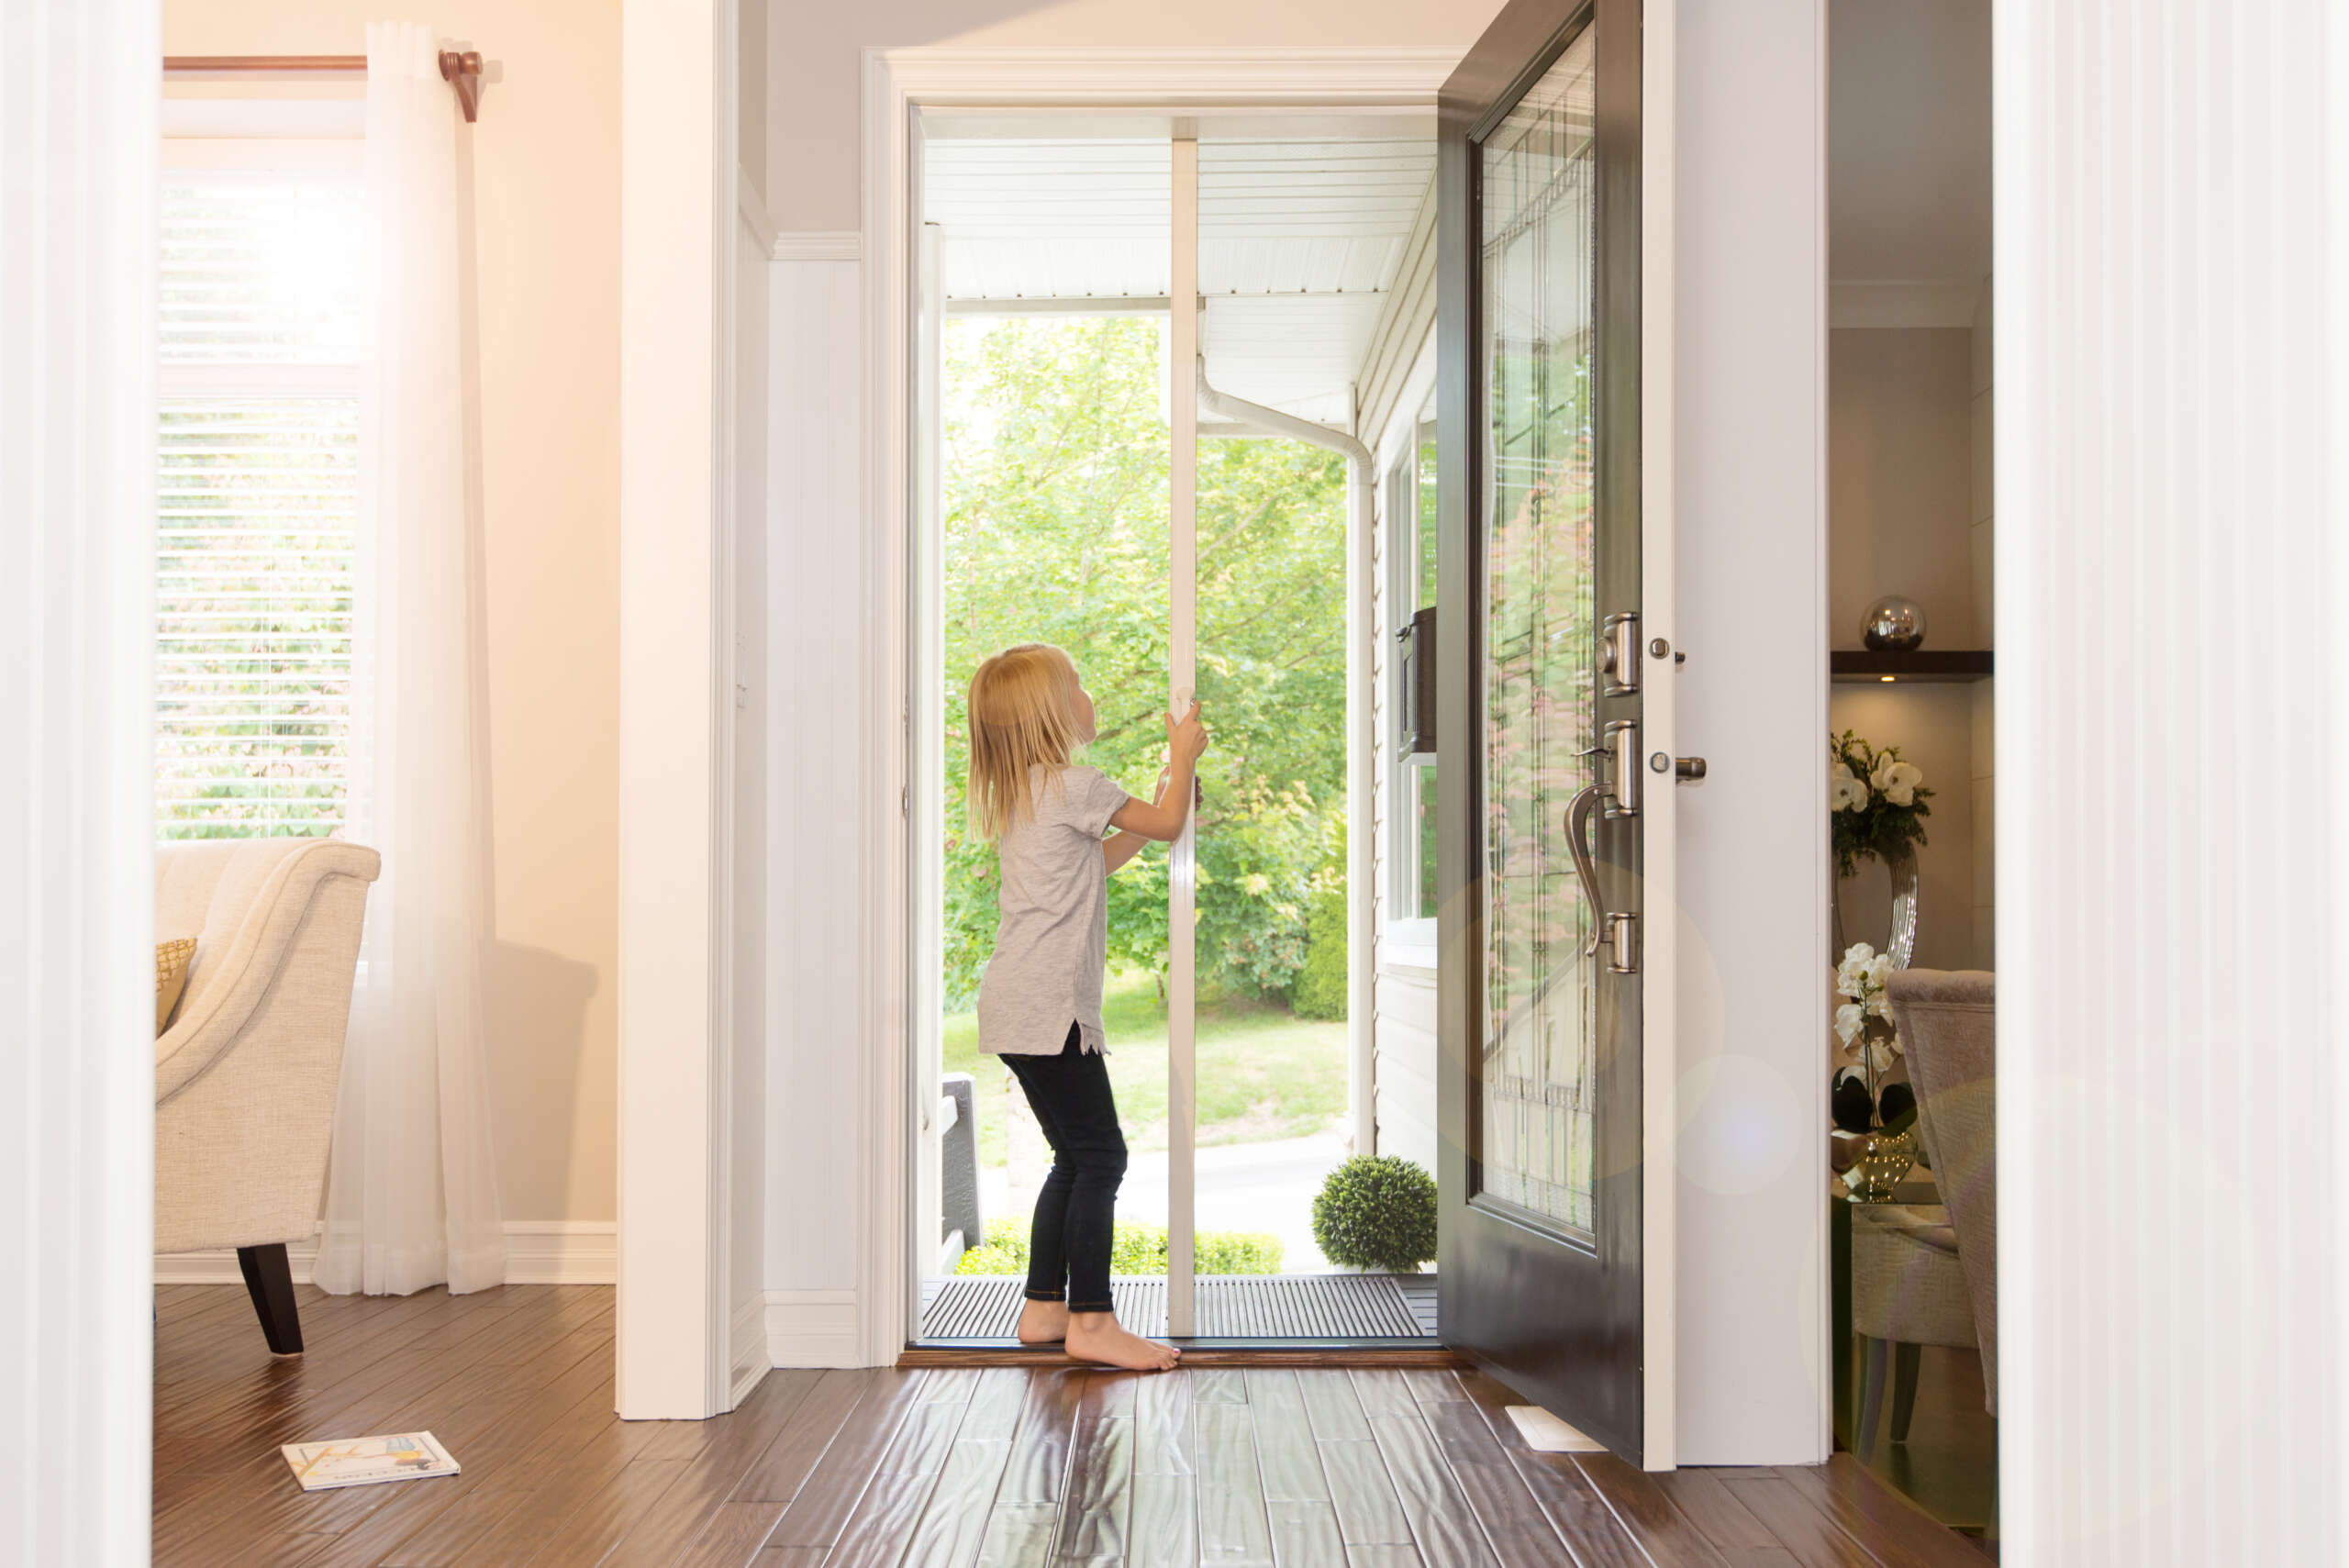 Phantom Screens for your back door. Keep an eye on the kids / grandchildren without worrying about bugs in the house.